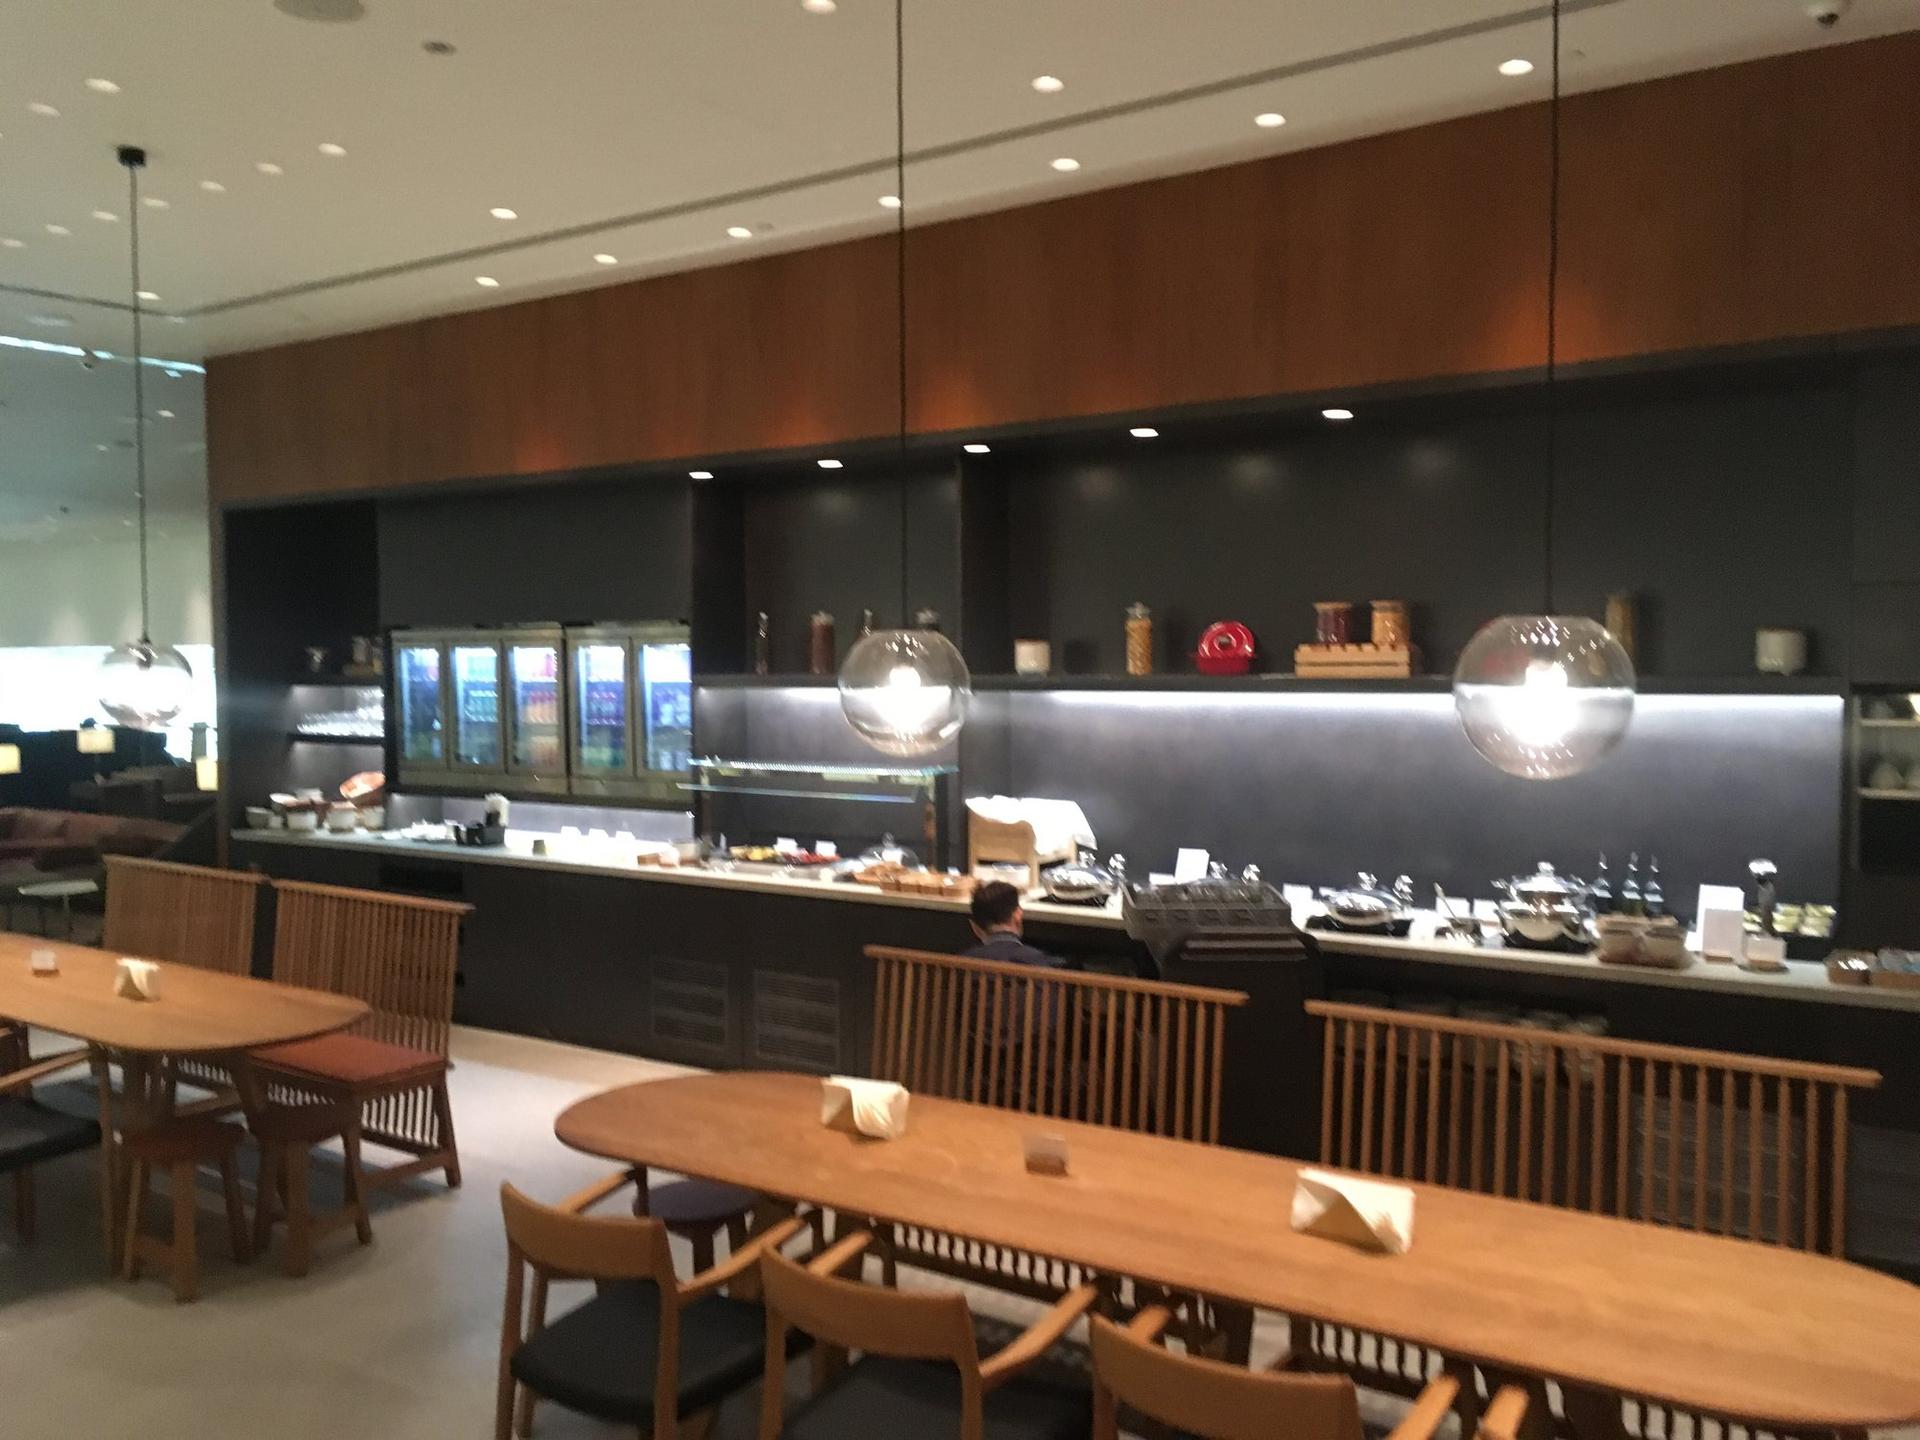 Cathay Pacific Lounge image 30 of 60